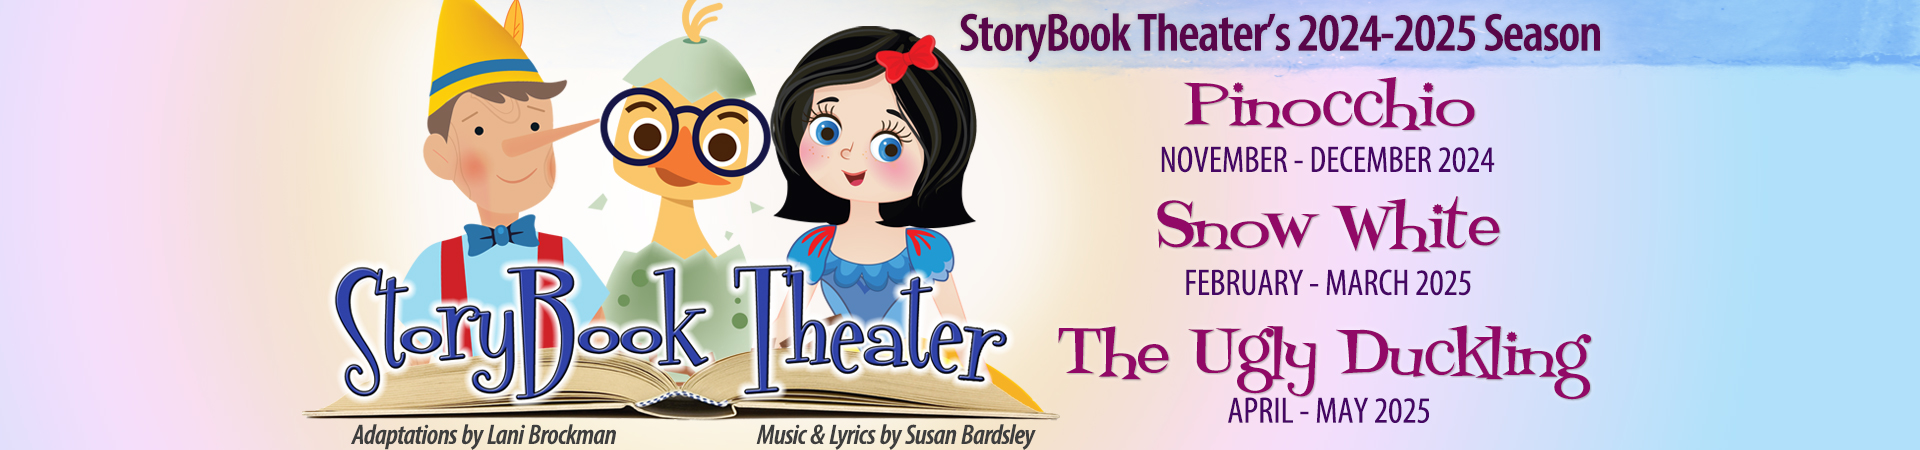 StoryBook Theater 2023-24